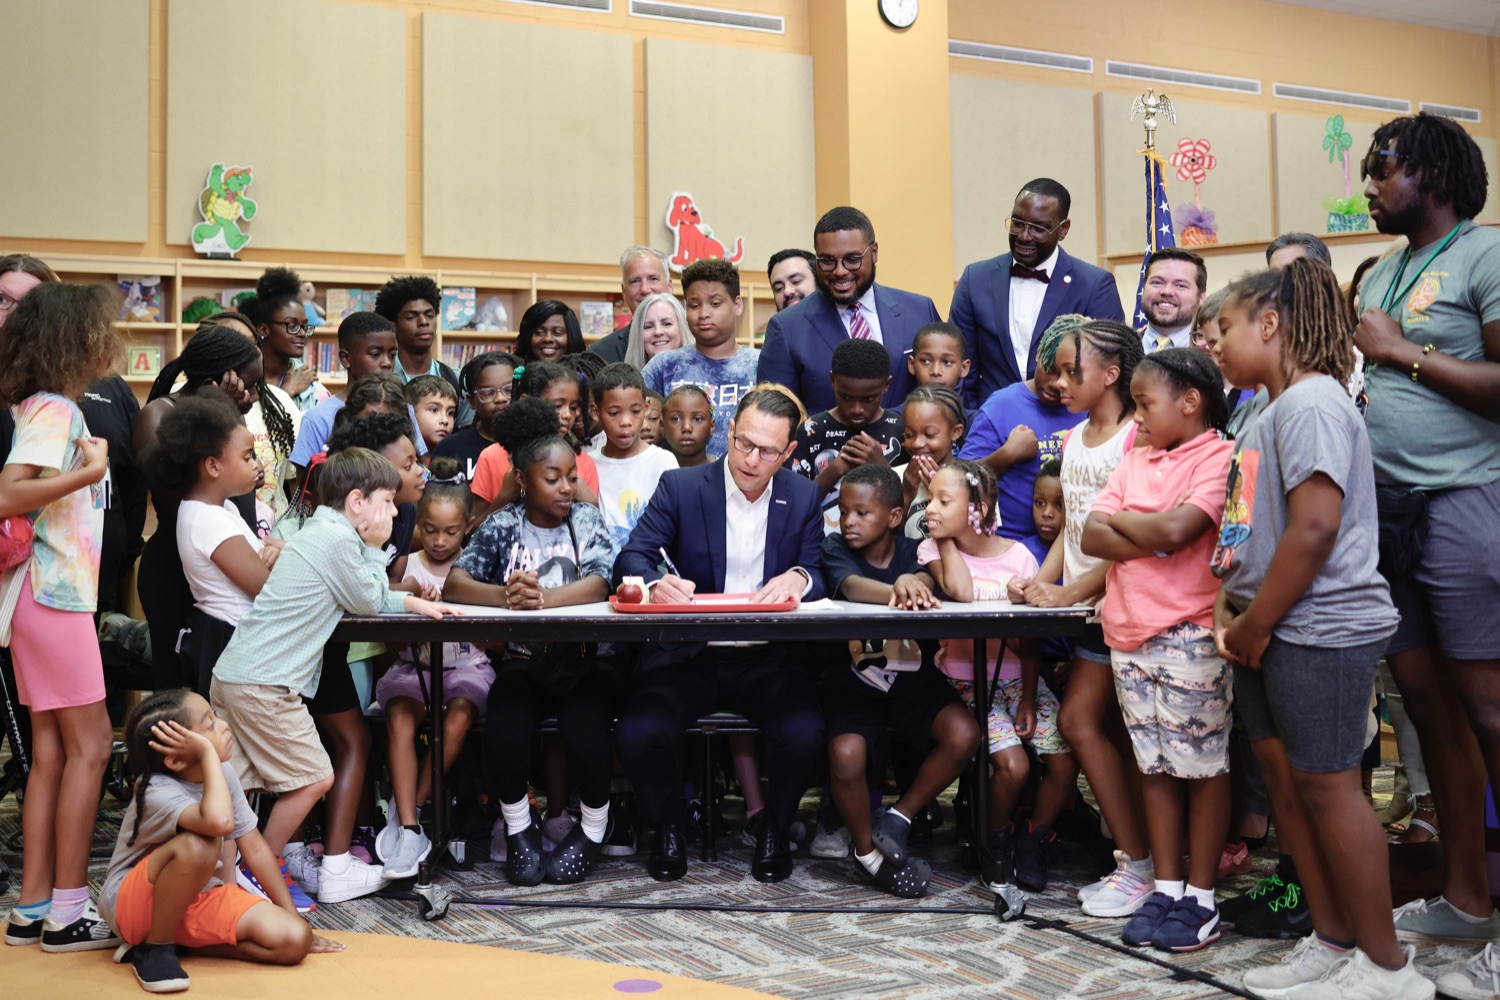 Governor Shapiro Signs Ceremonial Budget Bill Creating Universal Free Breakfast, Making Historic Investments in Public Education During Visit to Allegheny County Elementary School on August 8, 2023.<br><a href="https://filesource.amperwave.net/commonwealthofpa/photo/23563_Gov_Education_DZ_010.JPEG" target="_blank">⇣ Download Photo</a>